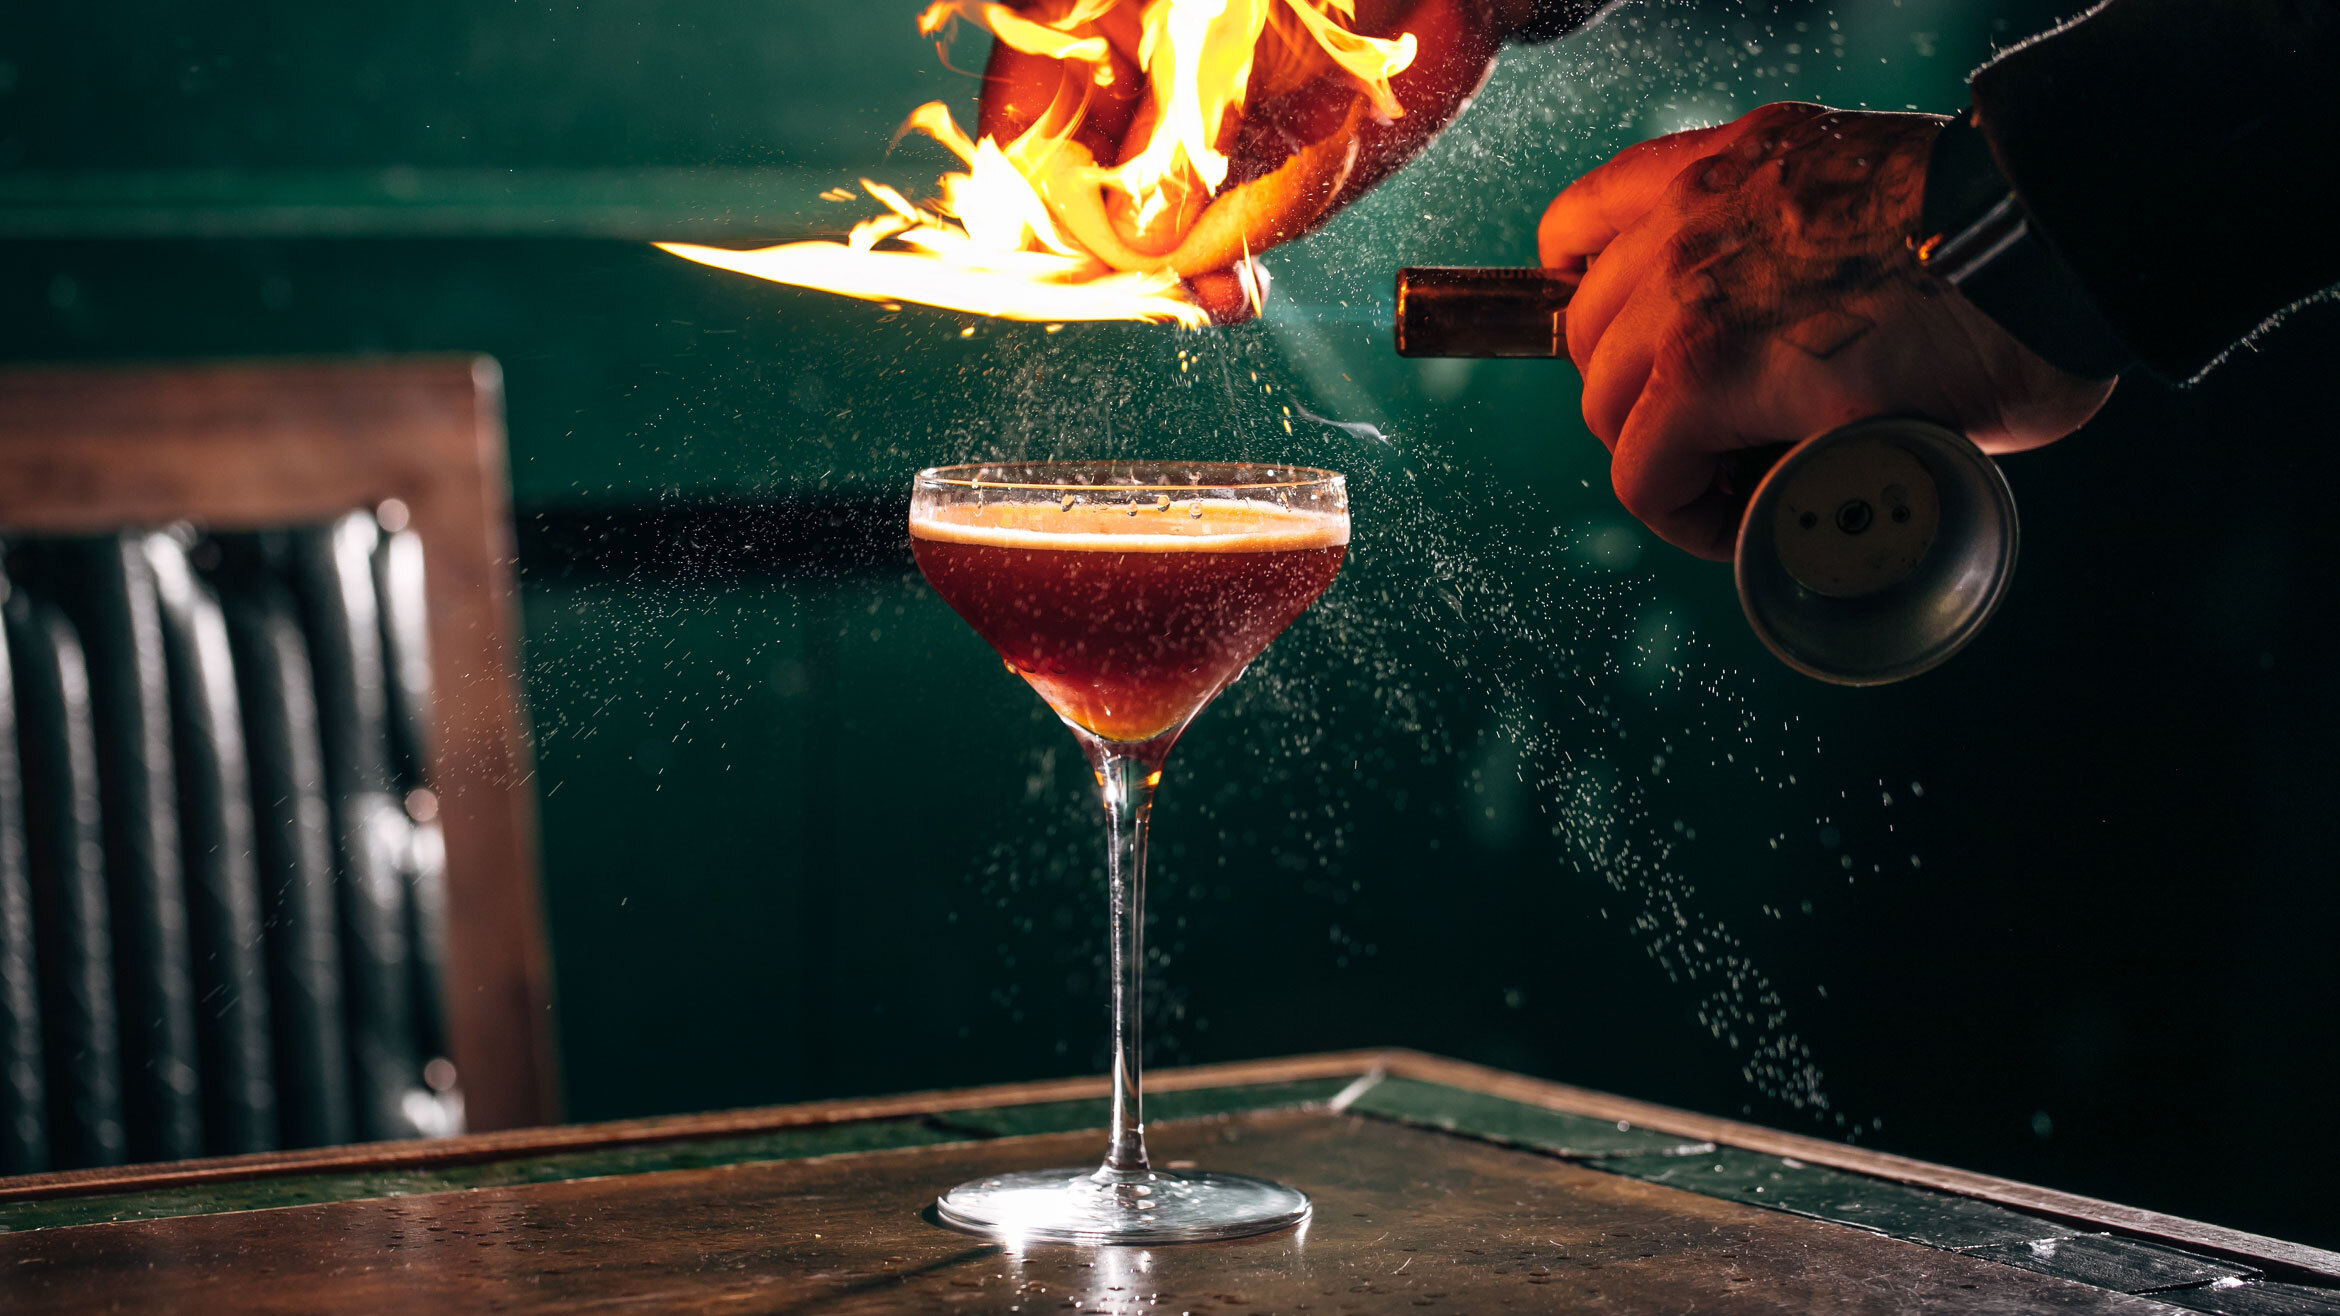 A hand squeezes a flaming citrus wedge into a cocktail glass